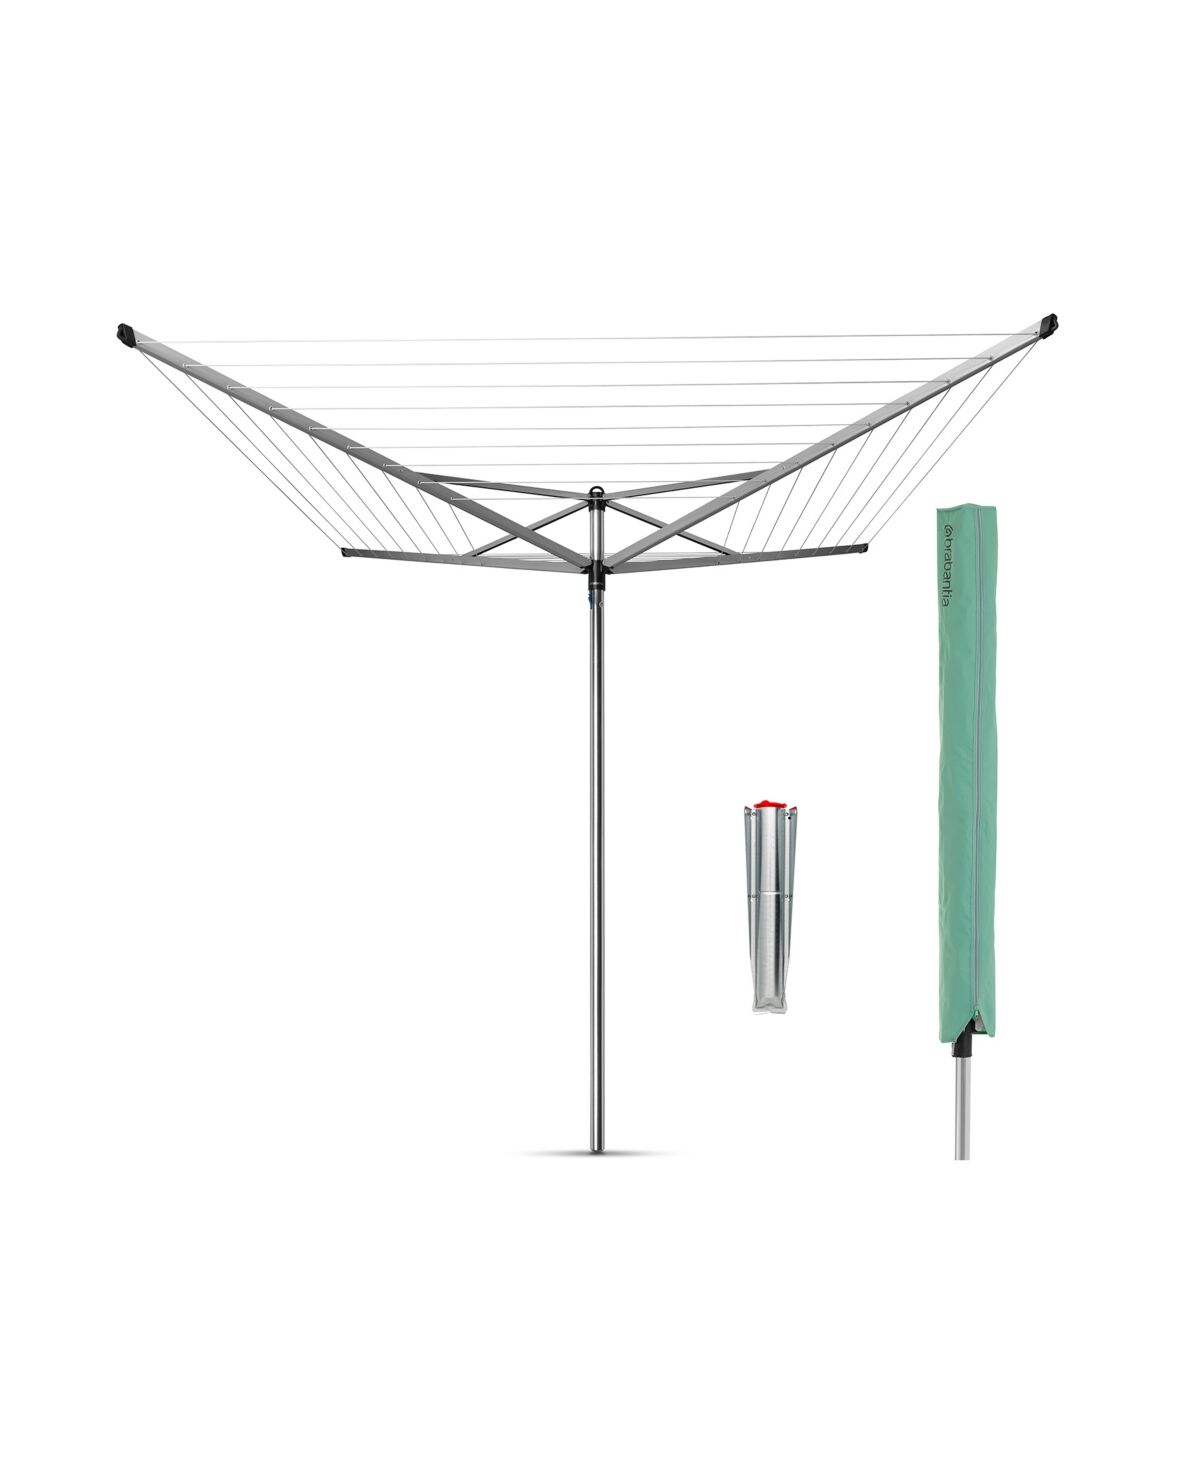 Brabantia Rotary Top Spinner Clothesline - 164', 50 Meter with Metal Ground Spike and Protective Cover Set - Metallic Gray